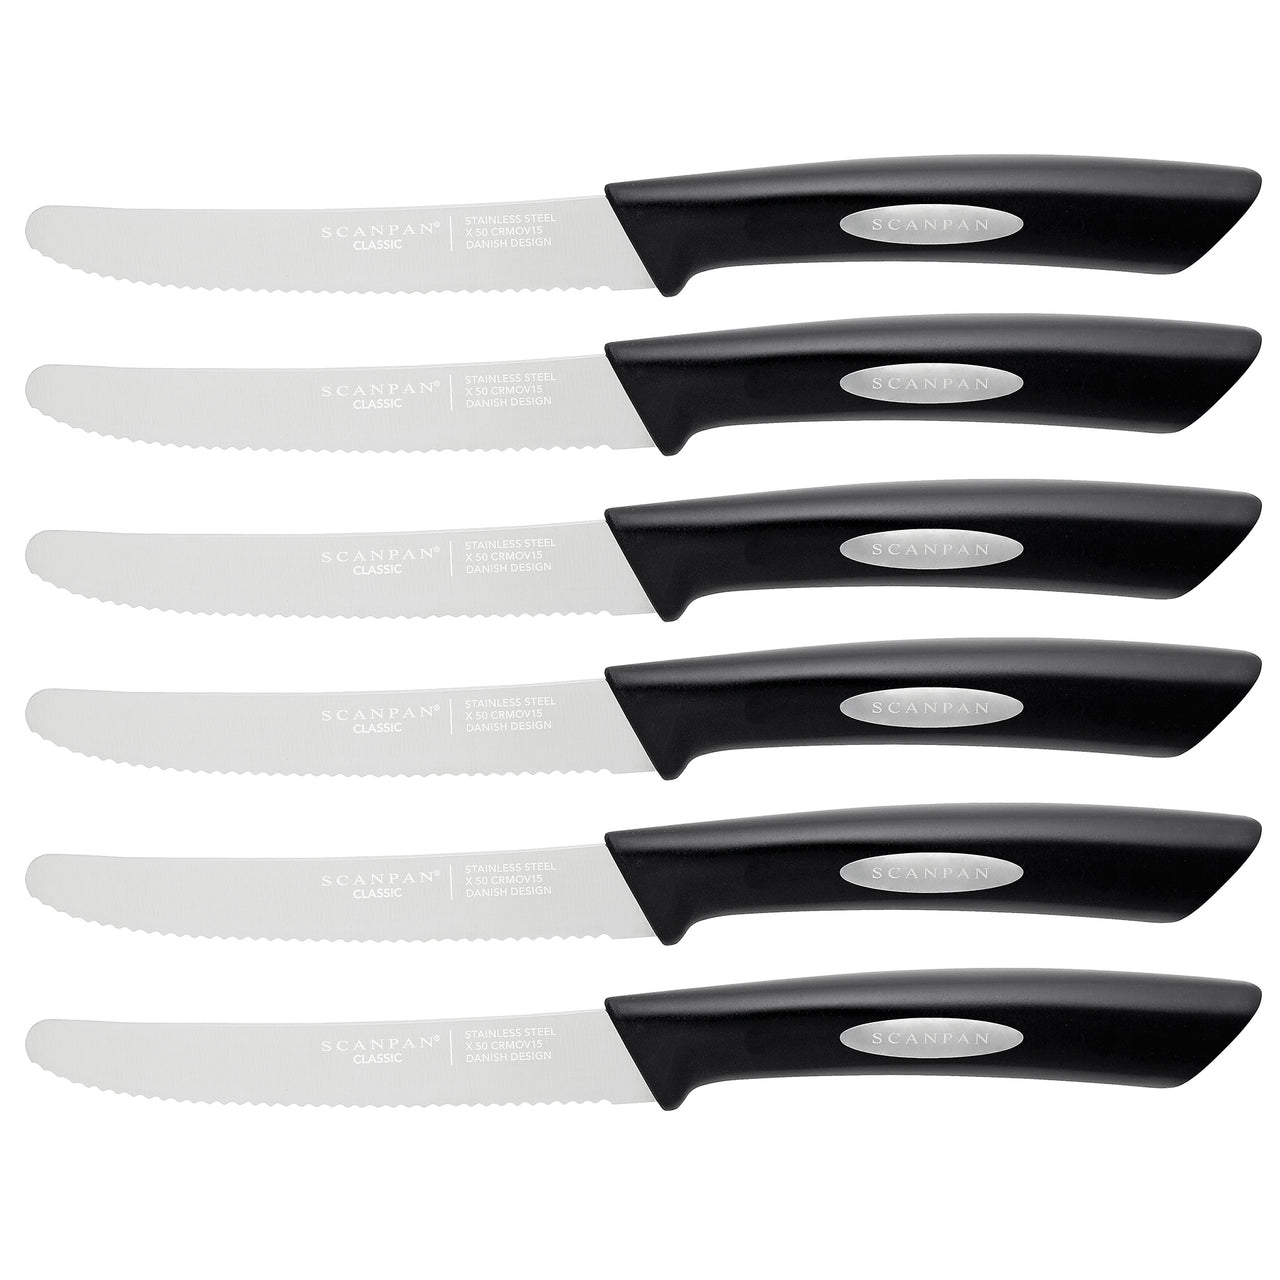 Stainless Steel Steak Knives 11.5cm 6 Piece (Set of 6)